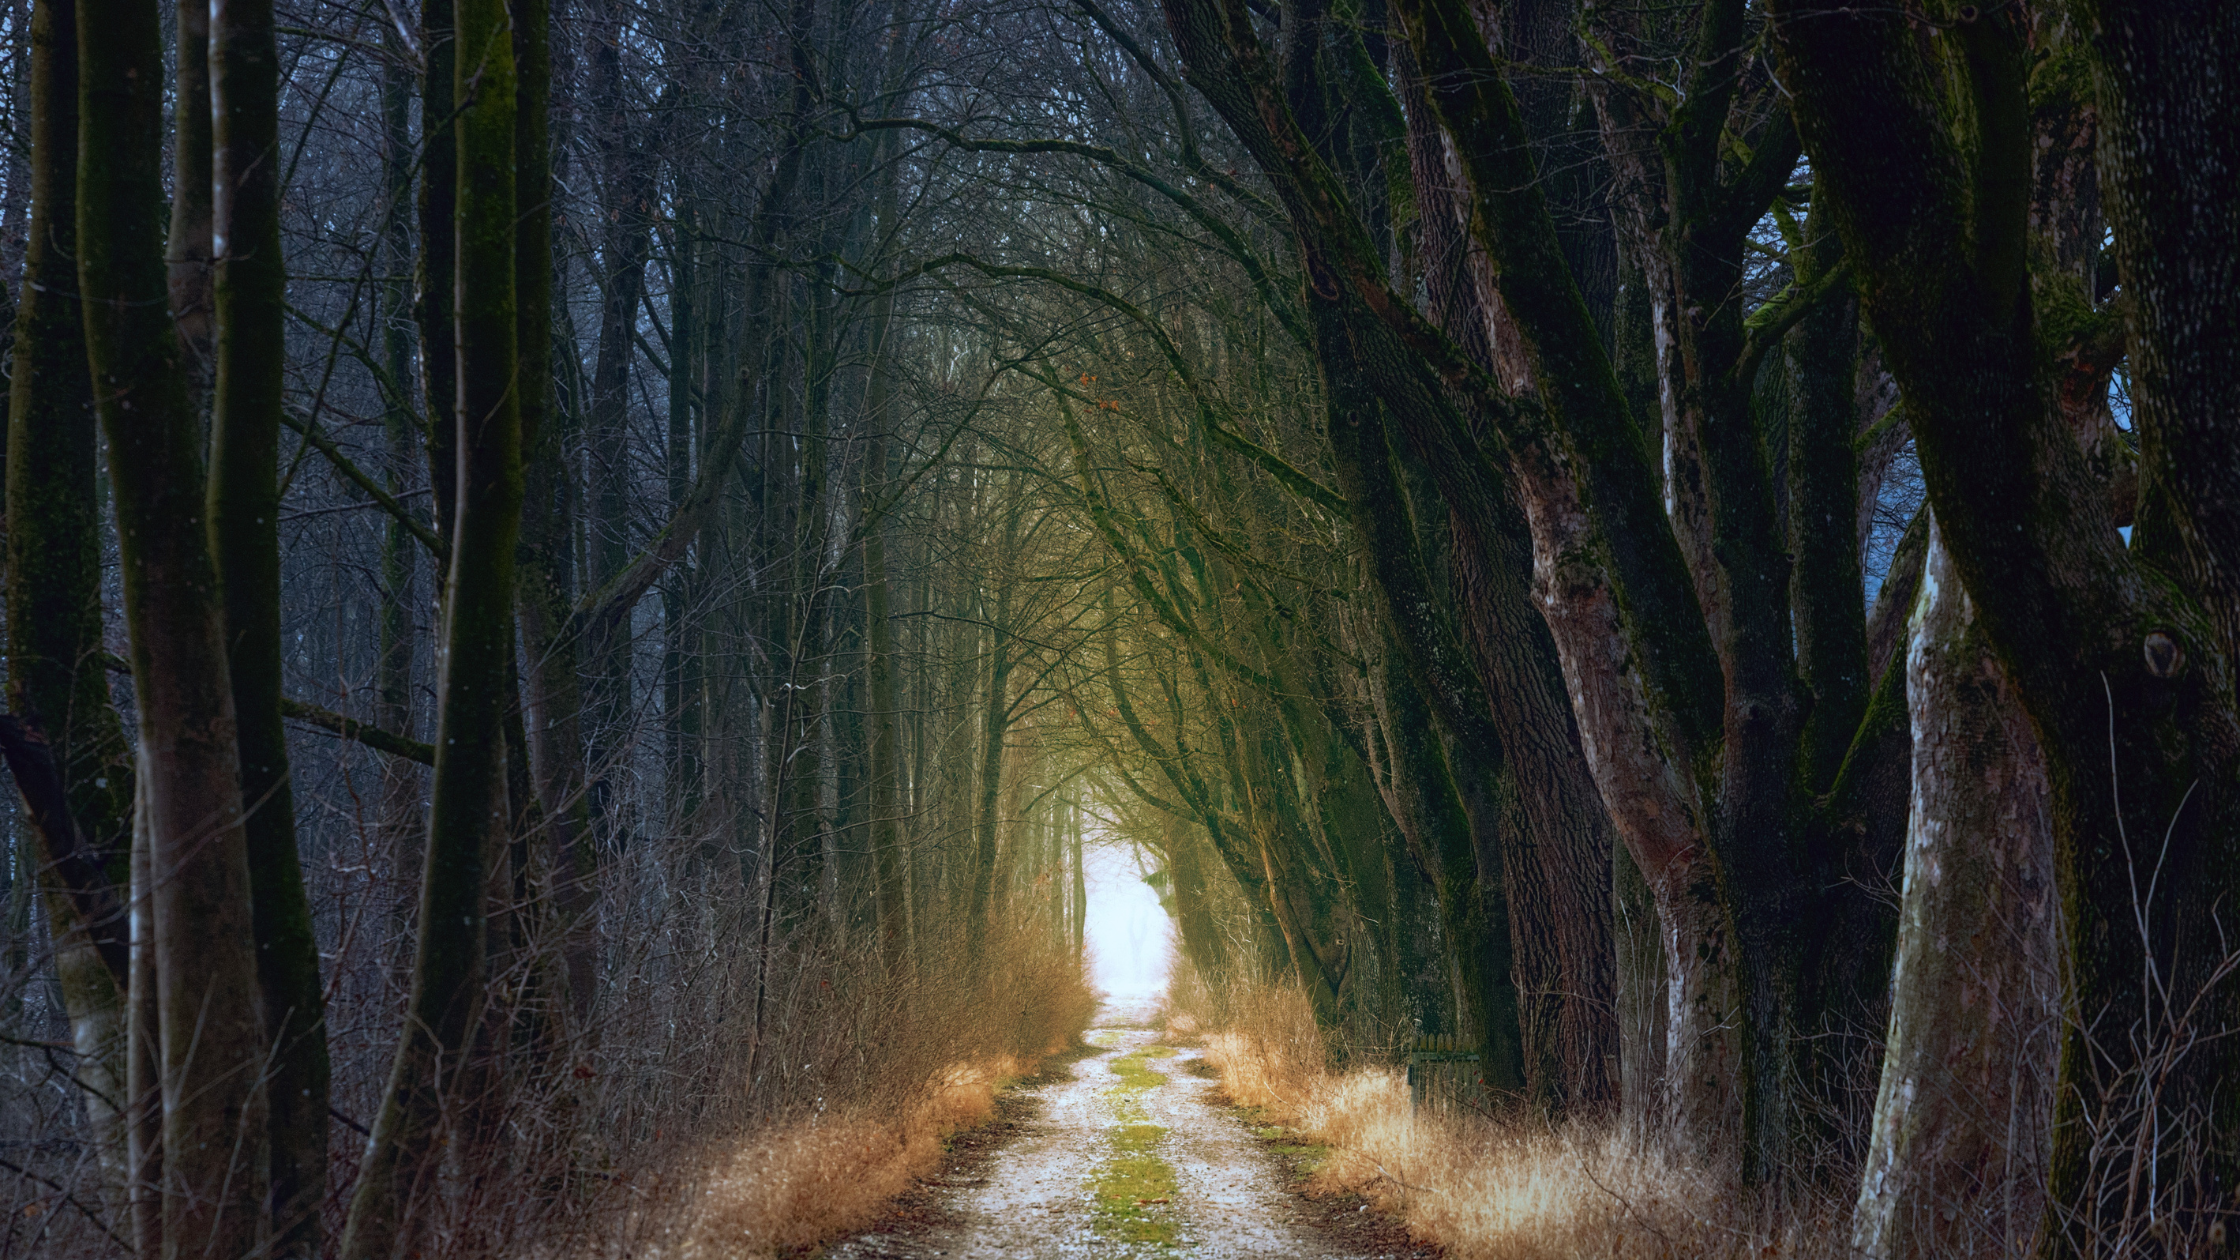 A tranquil forest pathway lined with tall, bare trees, their branches arching overhead to form a natural tunnel. A soft light emanates from the end of the path, suggesting a clearing or exit in the distance. The ground is covered with fallen leaves and patches of grass, leading into the serene depth of the woods.